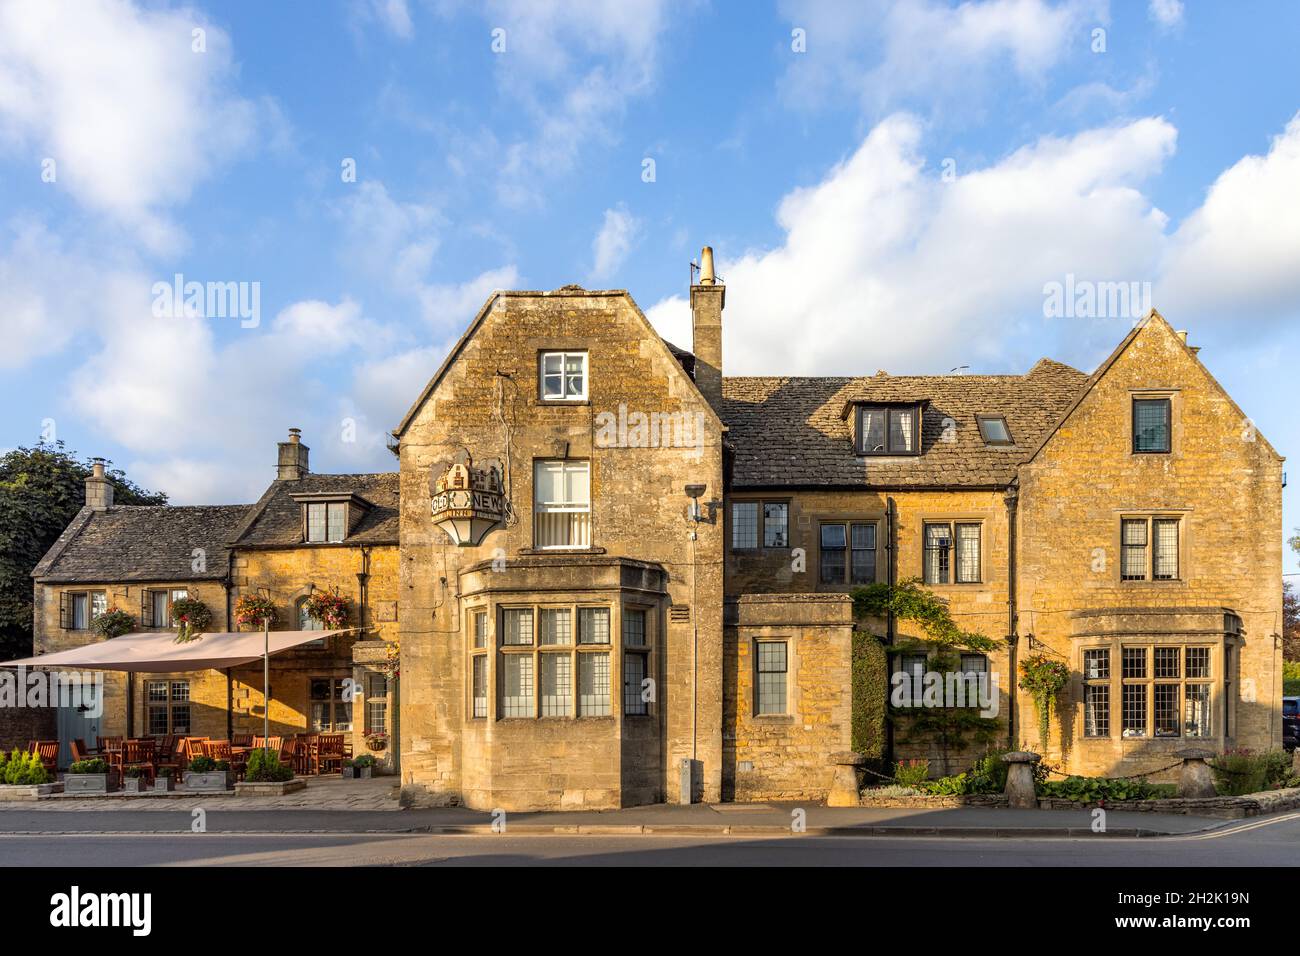 The Old New Inn is an 18th century, Grade II listed property situated in the village of Bourton on the Water, Gloucestershire, England. Stock Photo